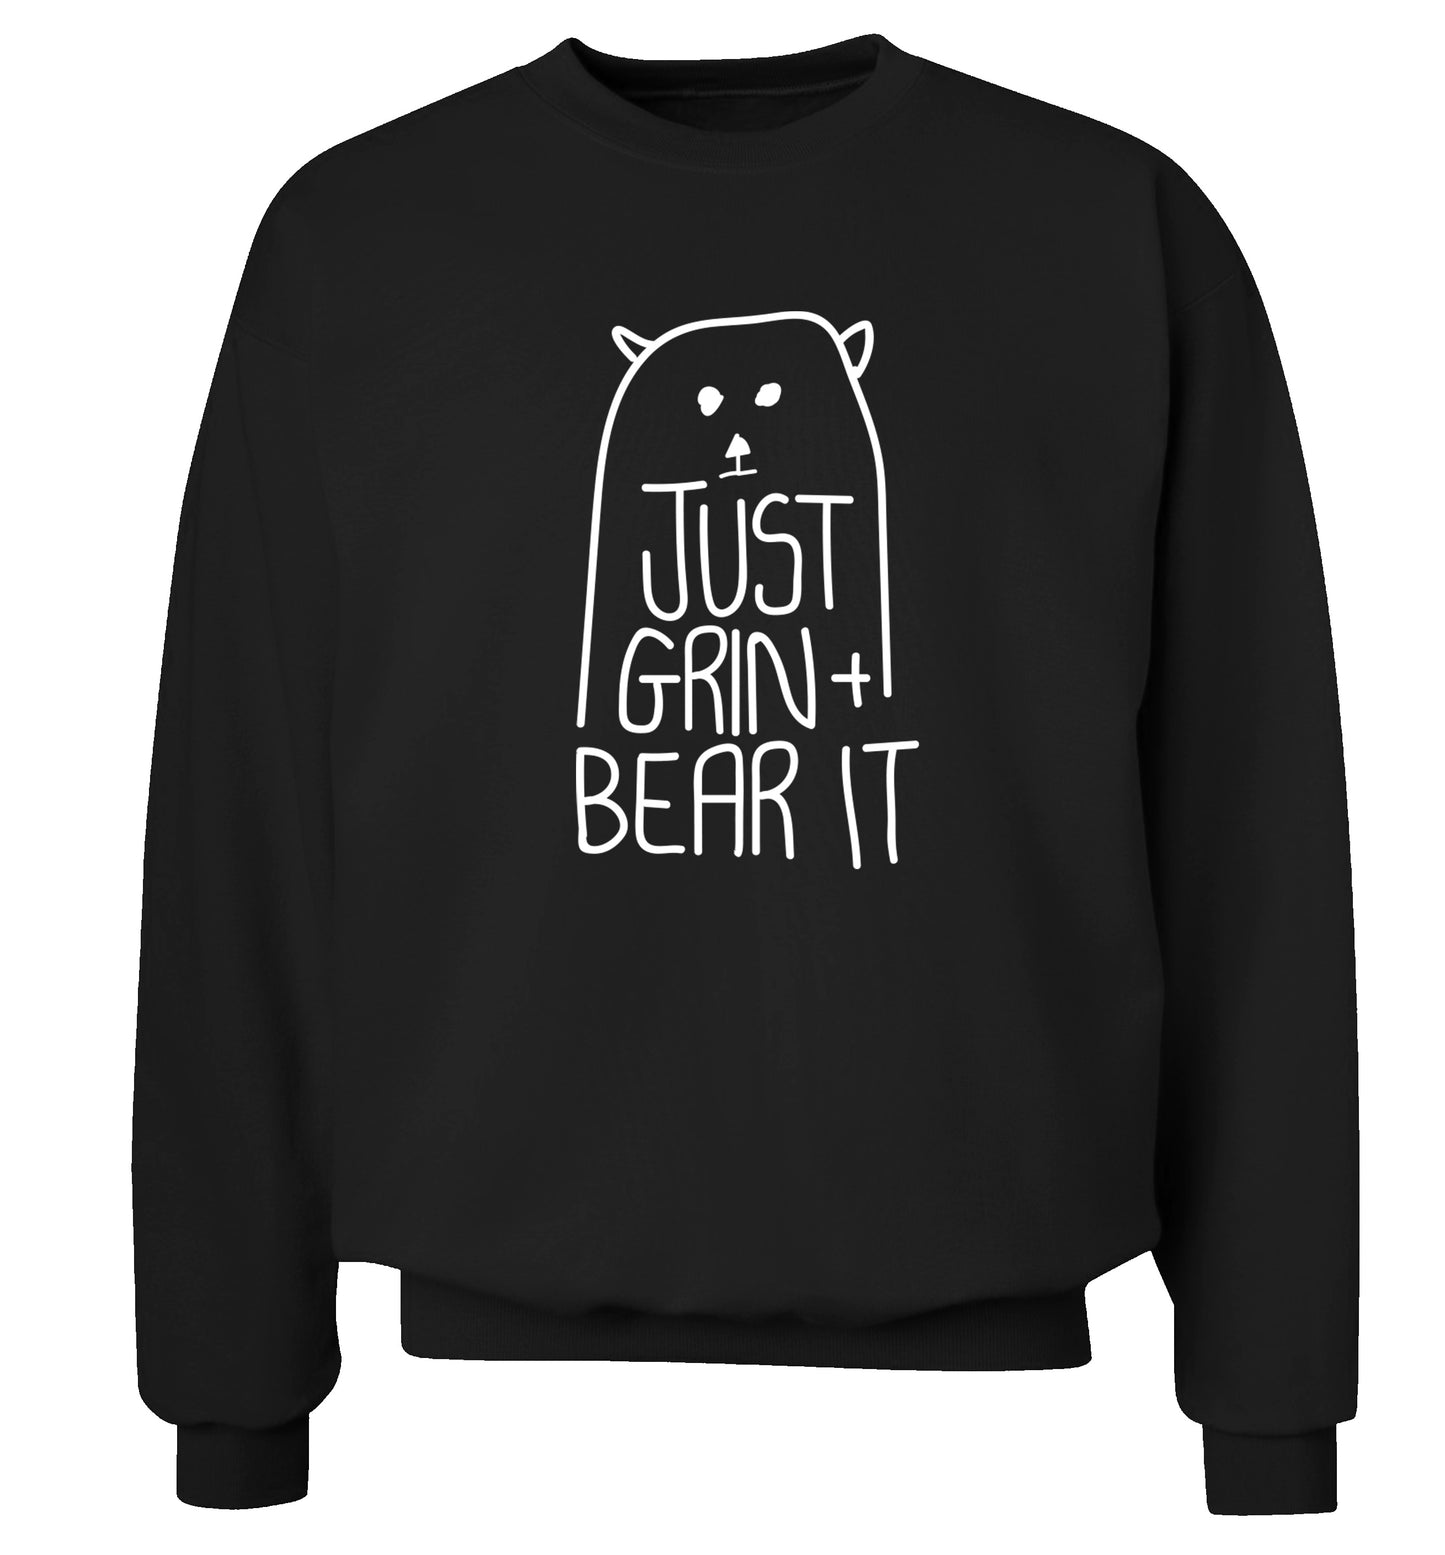 Just grin and bear it Adult's unisex black Sweater 2XL